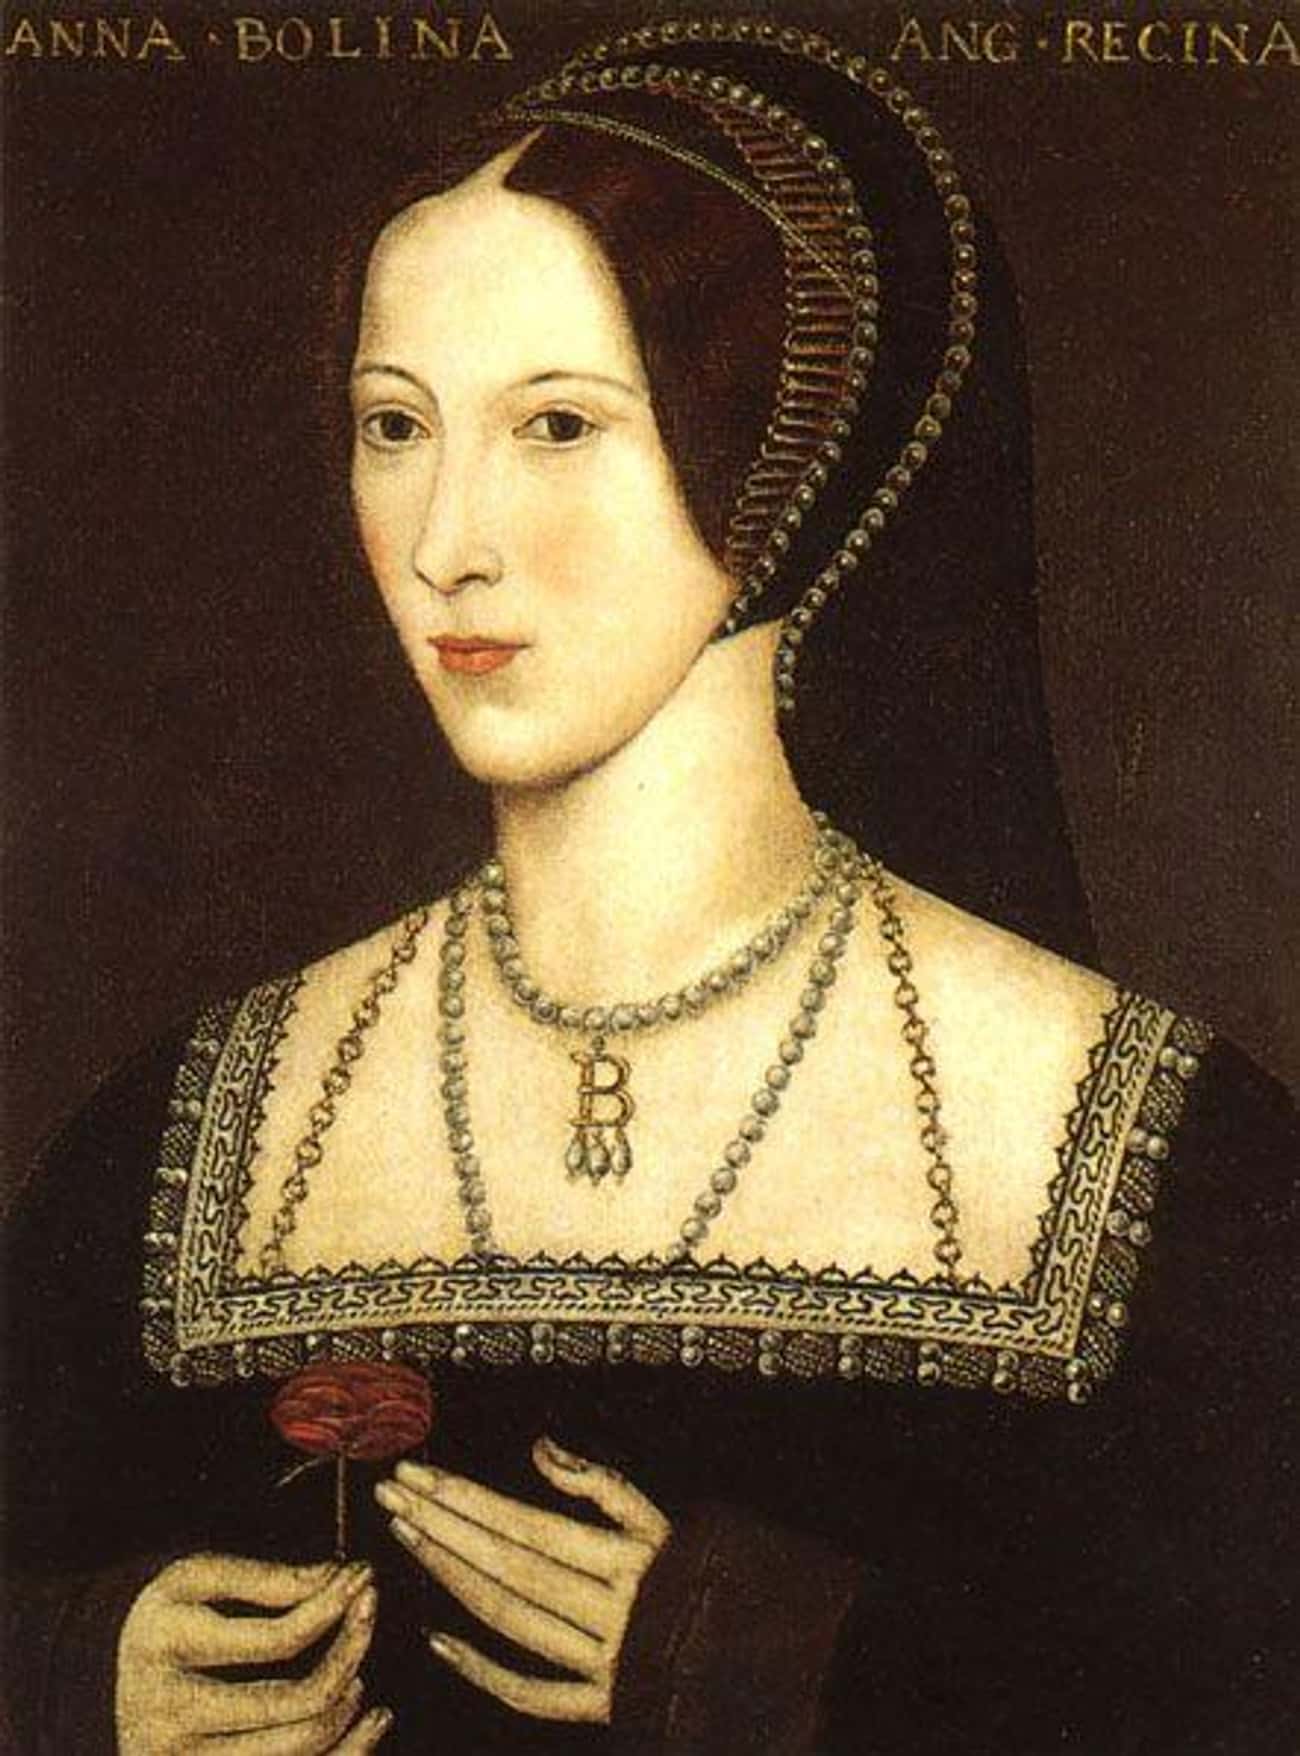 Henry VIII Accused Anne Boleyn Of Incest Because She Didn't Give Him A Male Heir